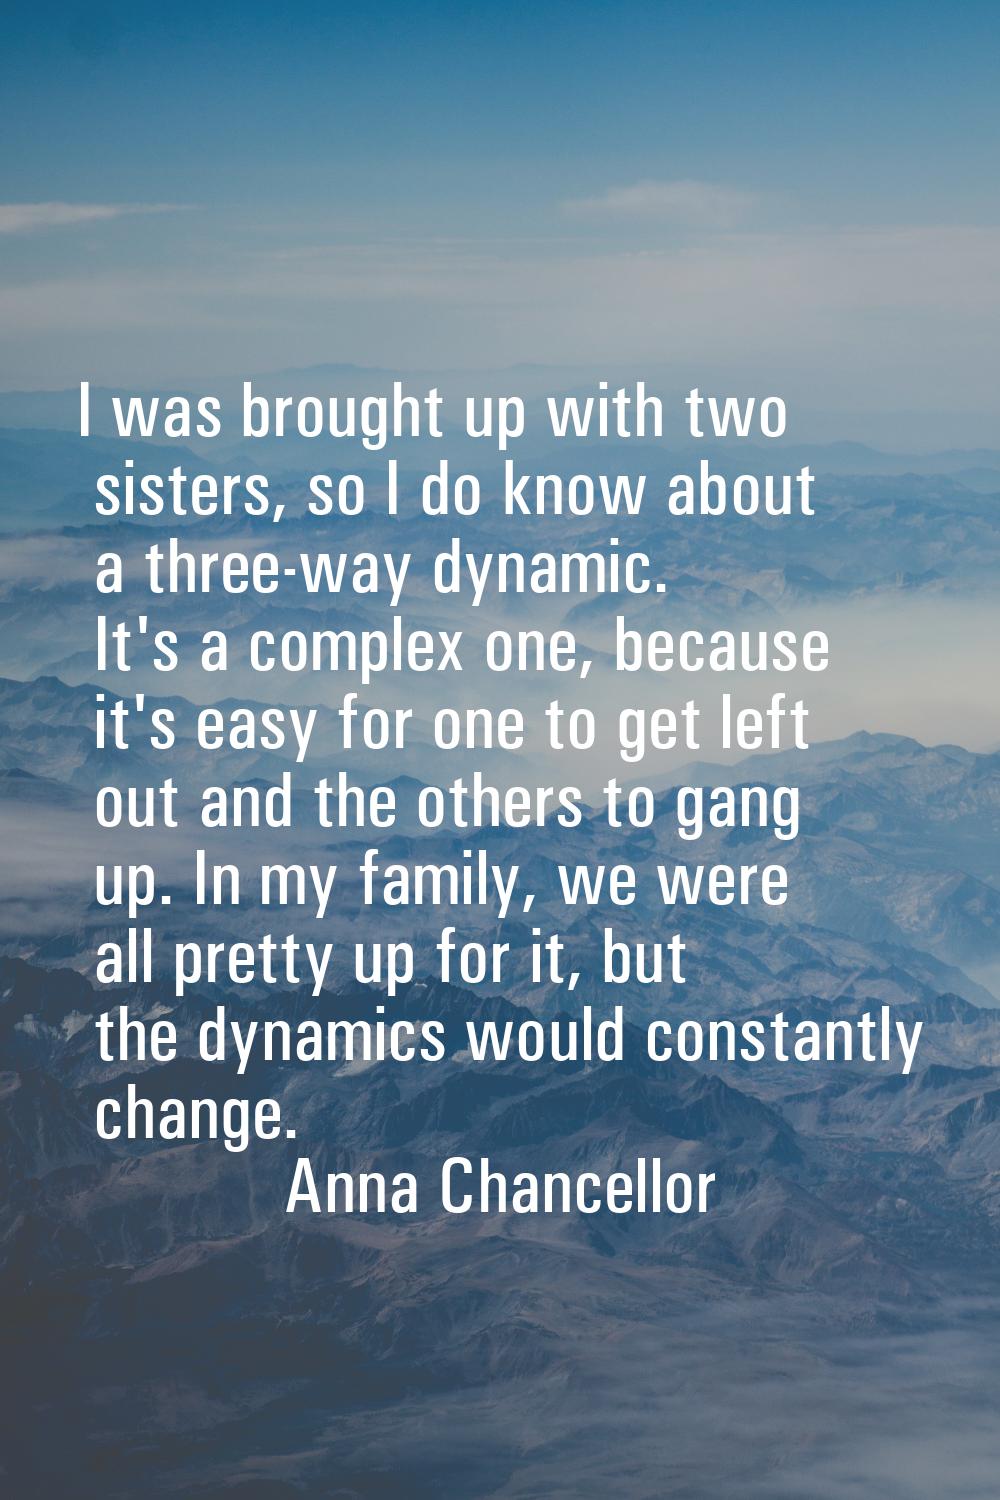 I was brought up with two sisters, so I do know about a three-way dynamic. It's a complex one, beca